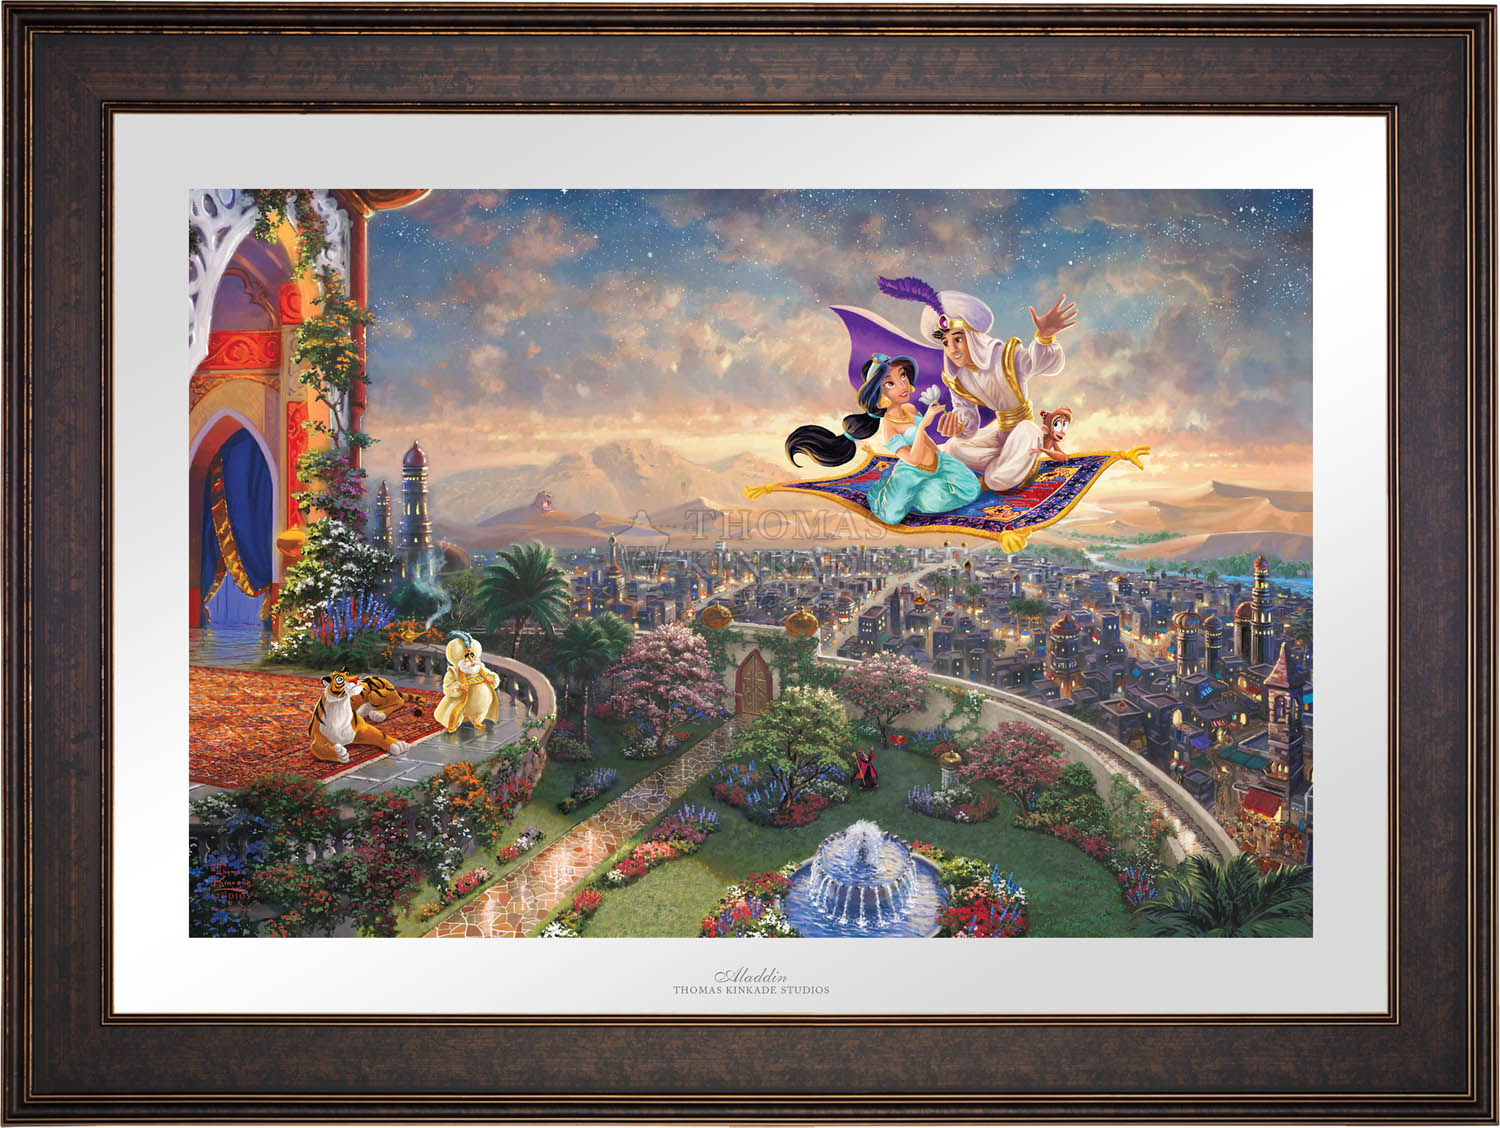 Aladdin and Jasmine soar above Agrabah and the neighboring kingdom on a magic carpet ride, as the Sultan of Agrabah (her father) and her overprotective pet tiger Rajah watch - Gallery Bronze Petite